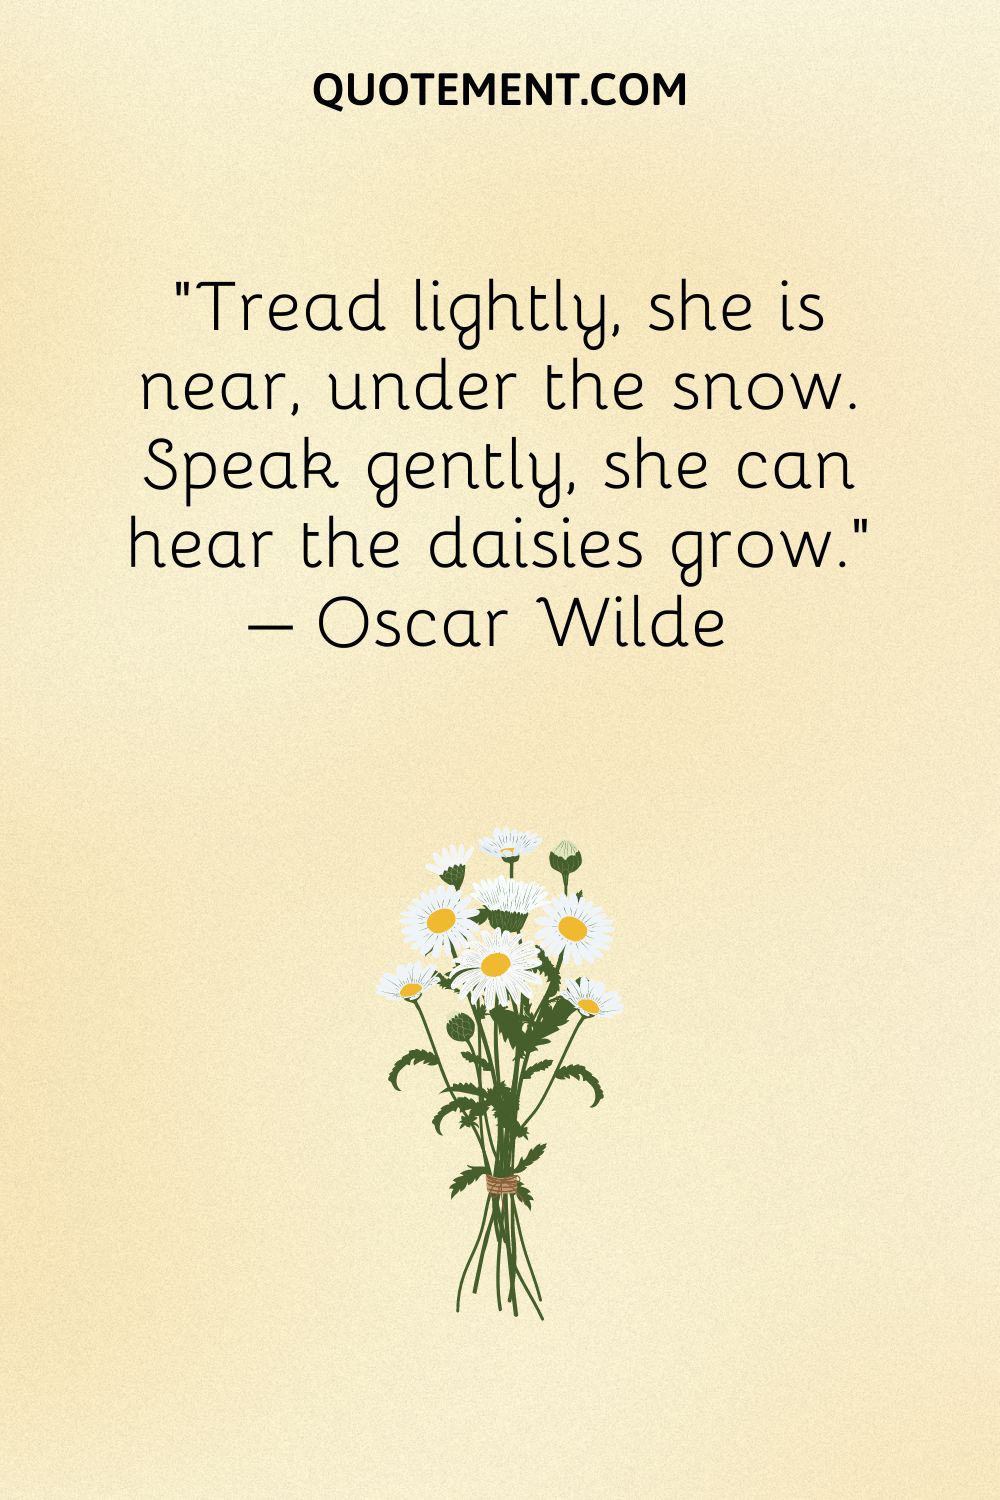 Speak gently, she can hear the daisies grow.